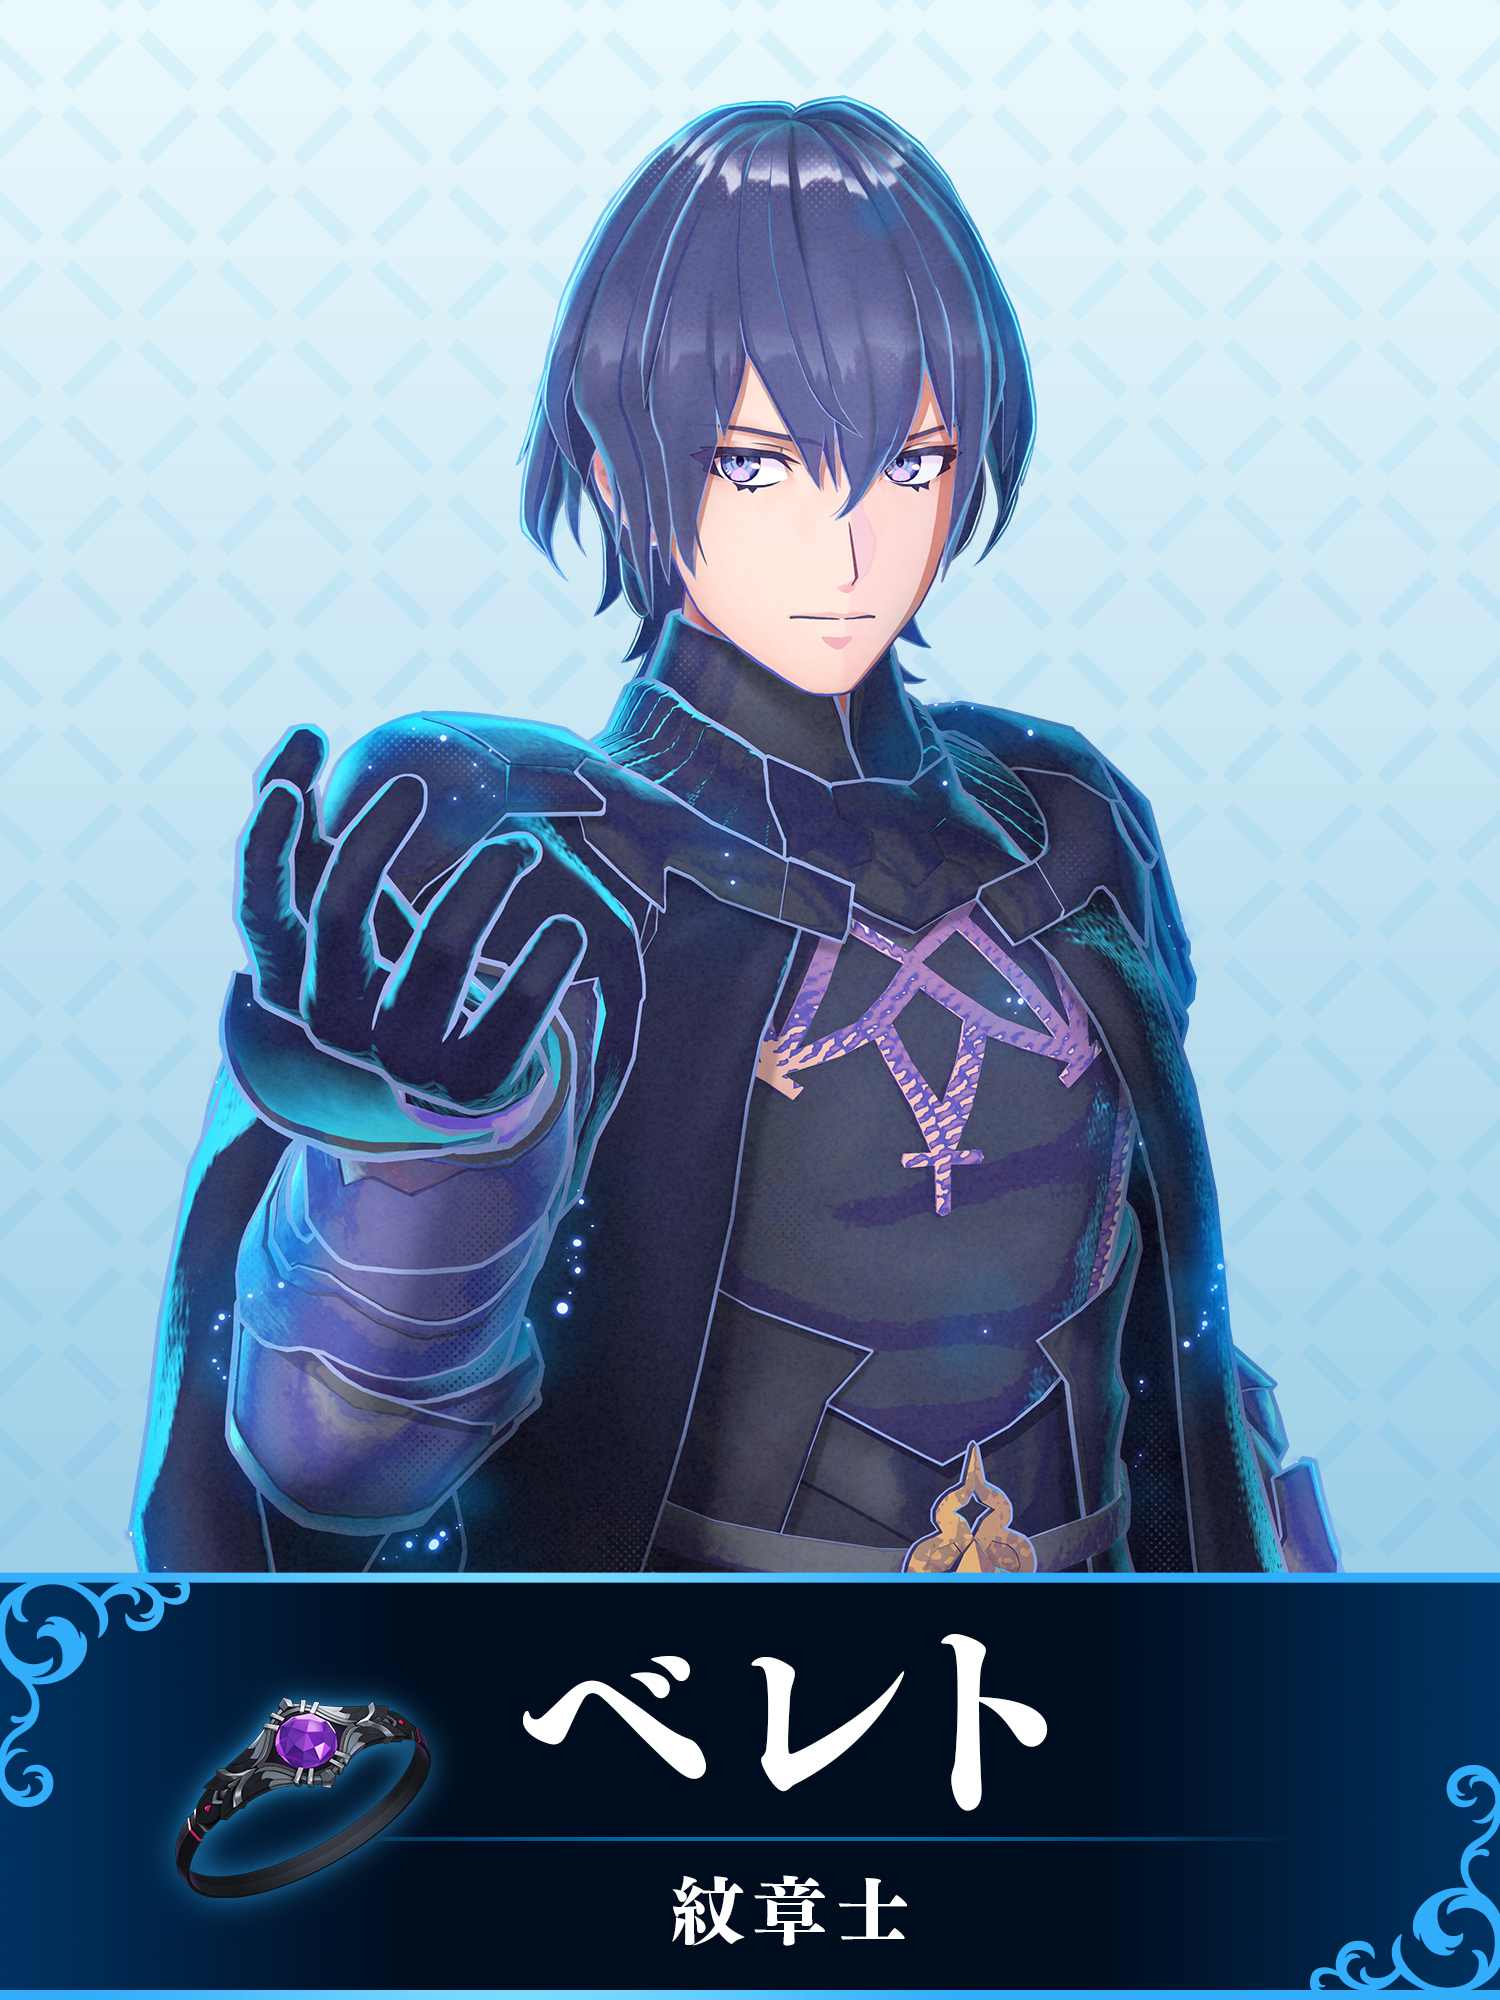 Portrait of Byleth, the Emblem of the Academy